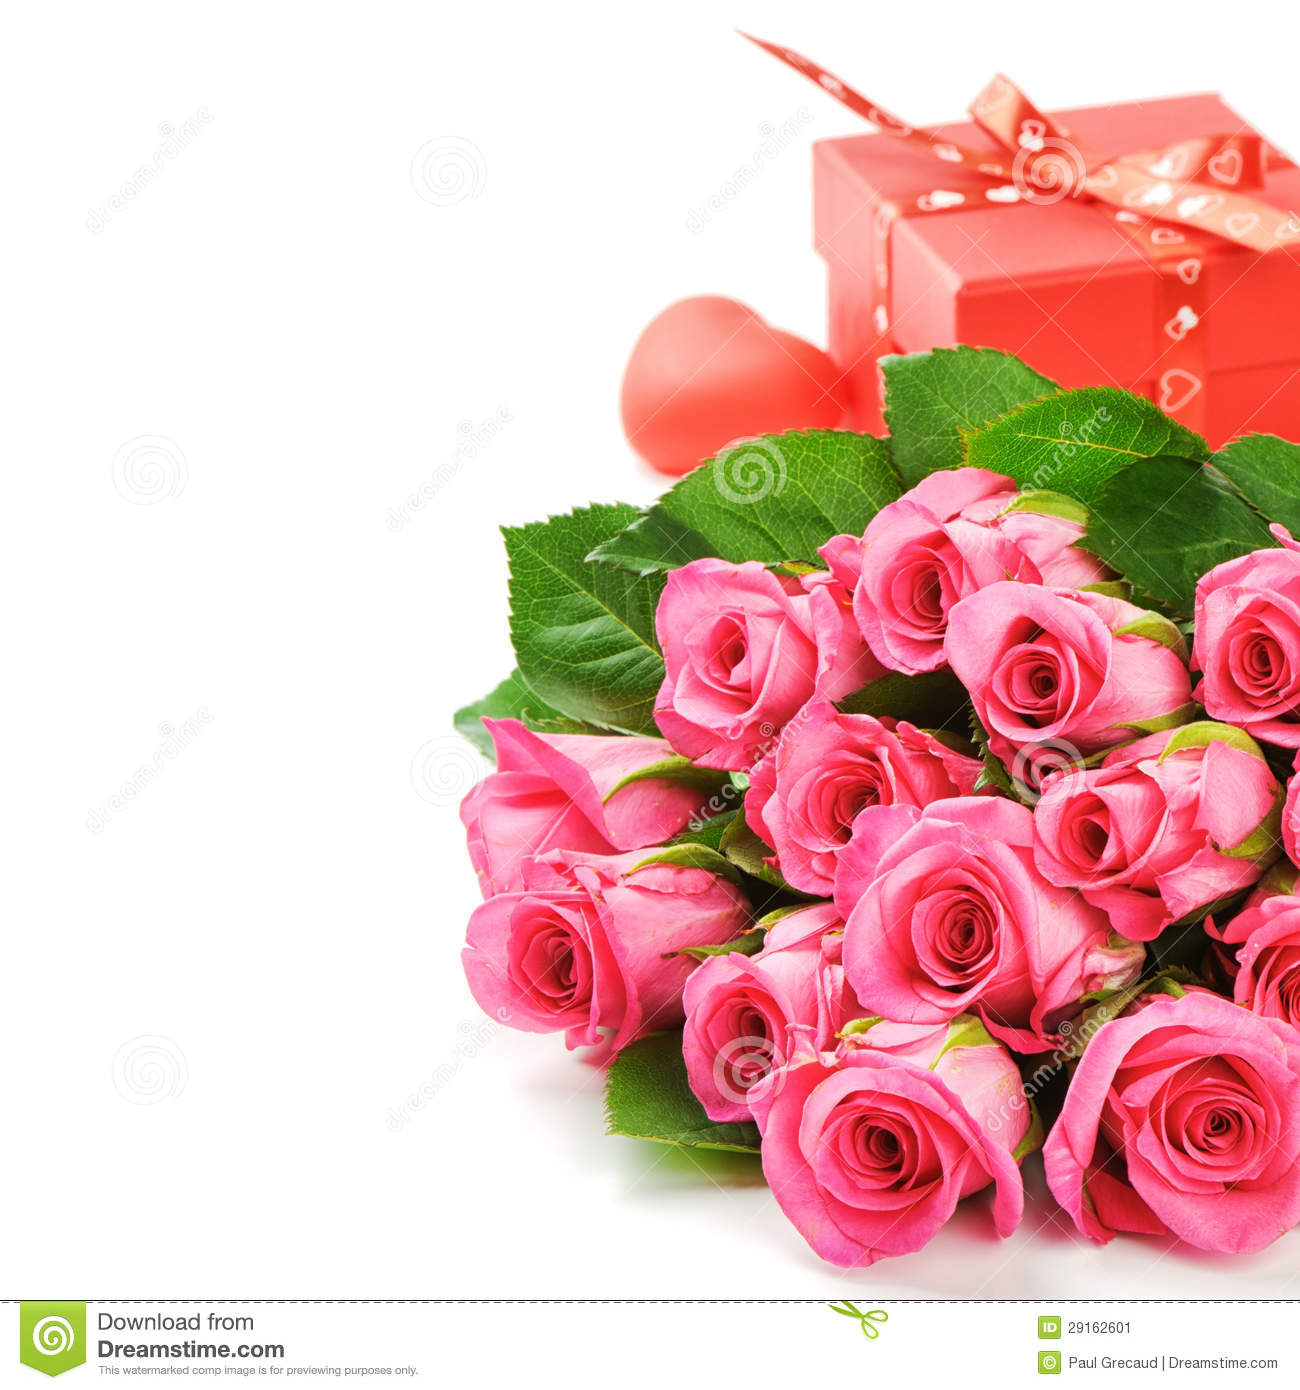 Bouquet Of Pink Roses With Valentine S Present Stock Image   Image